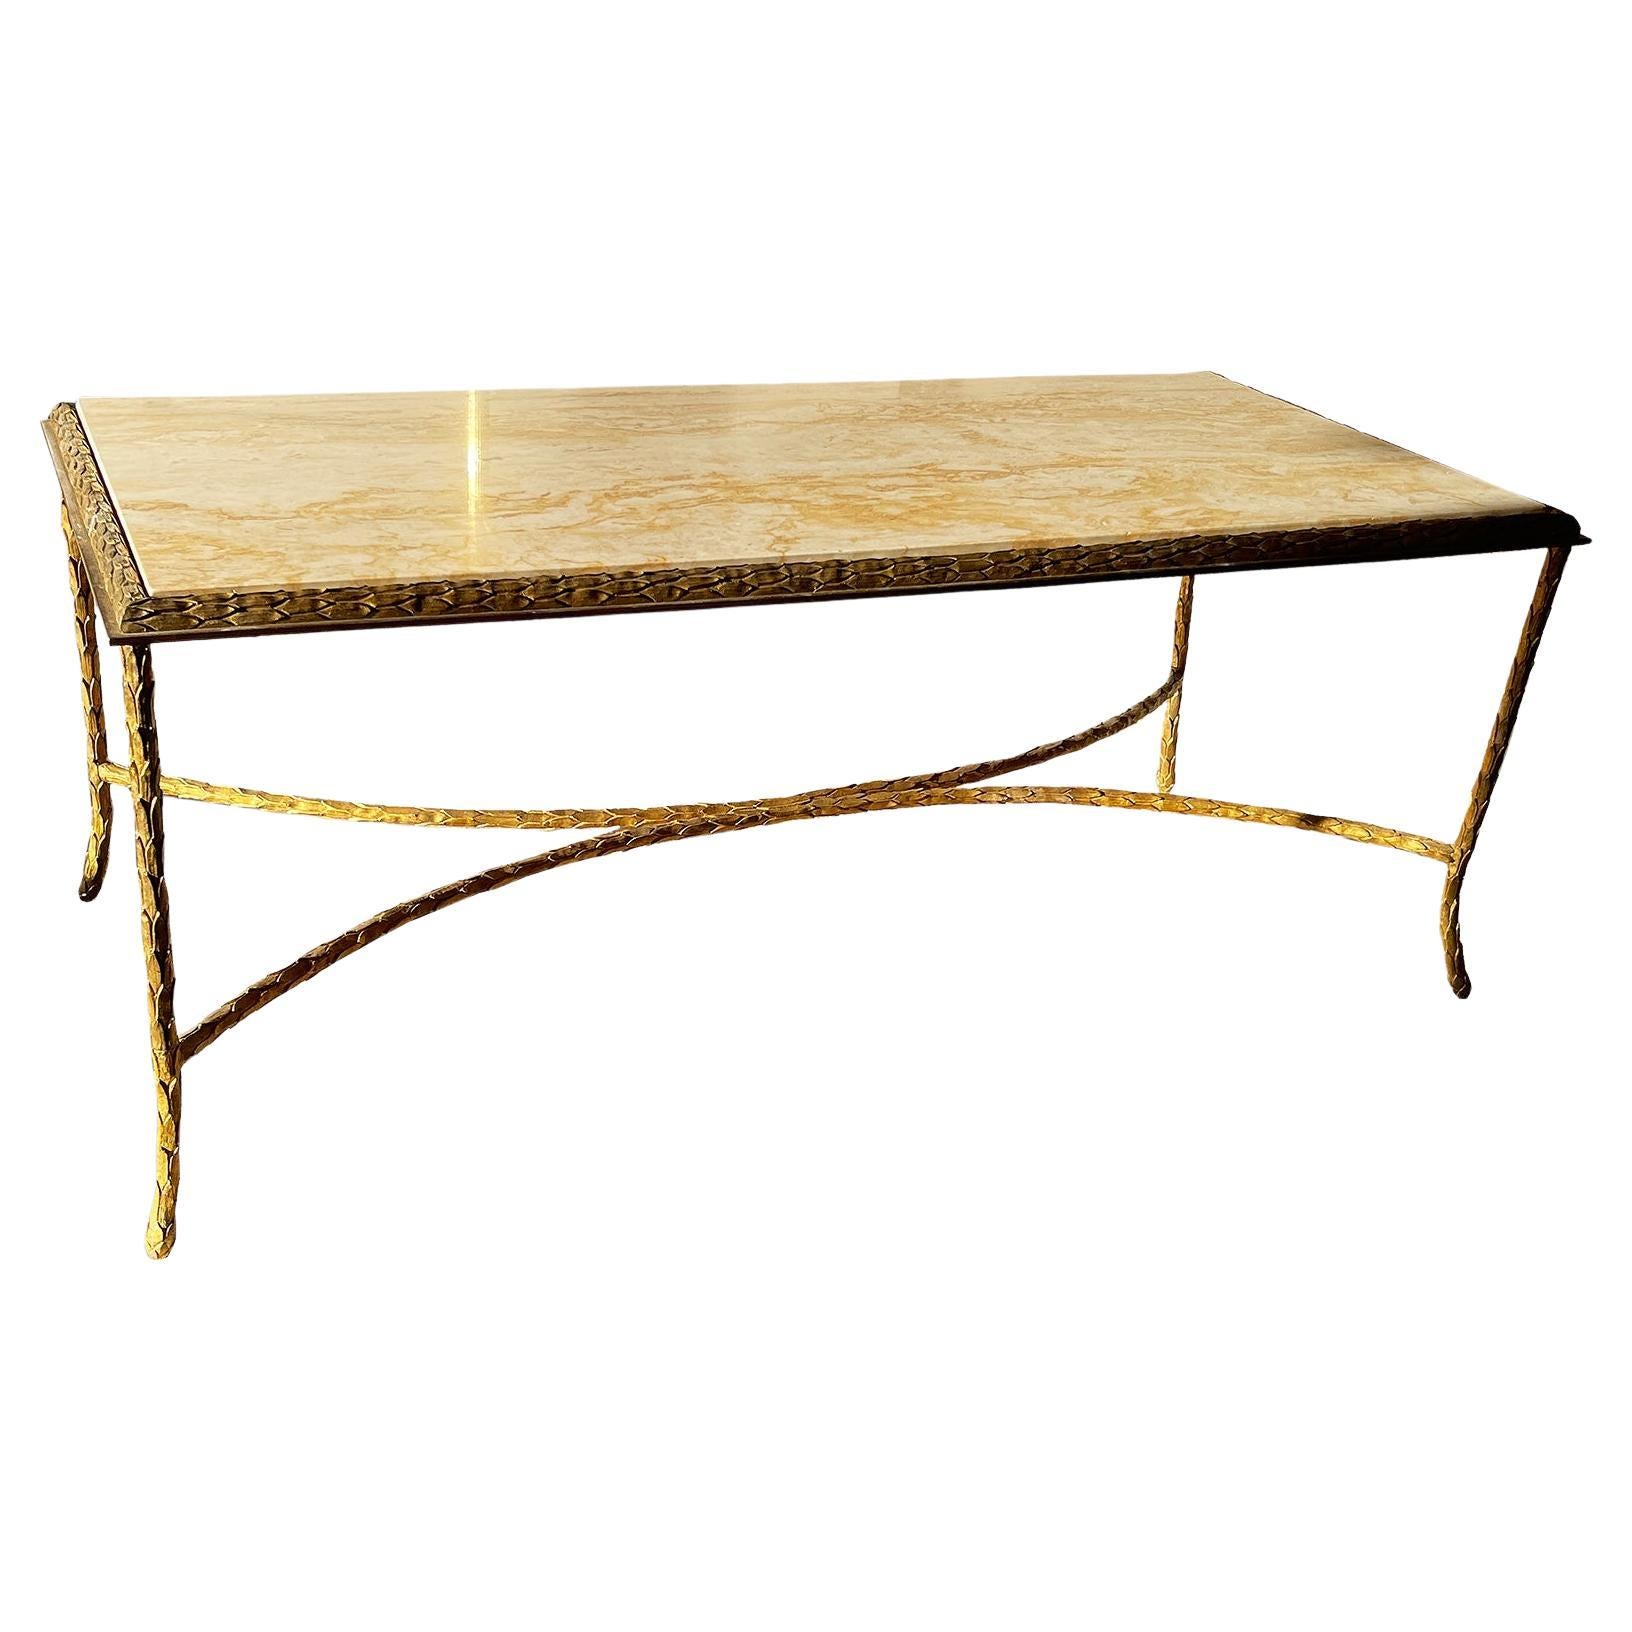 Maison Charles Coffee Table in Bronze with a Travertine Top, 1950 For Sale